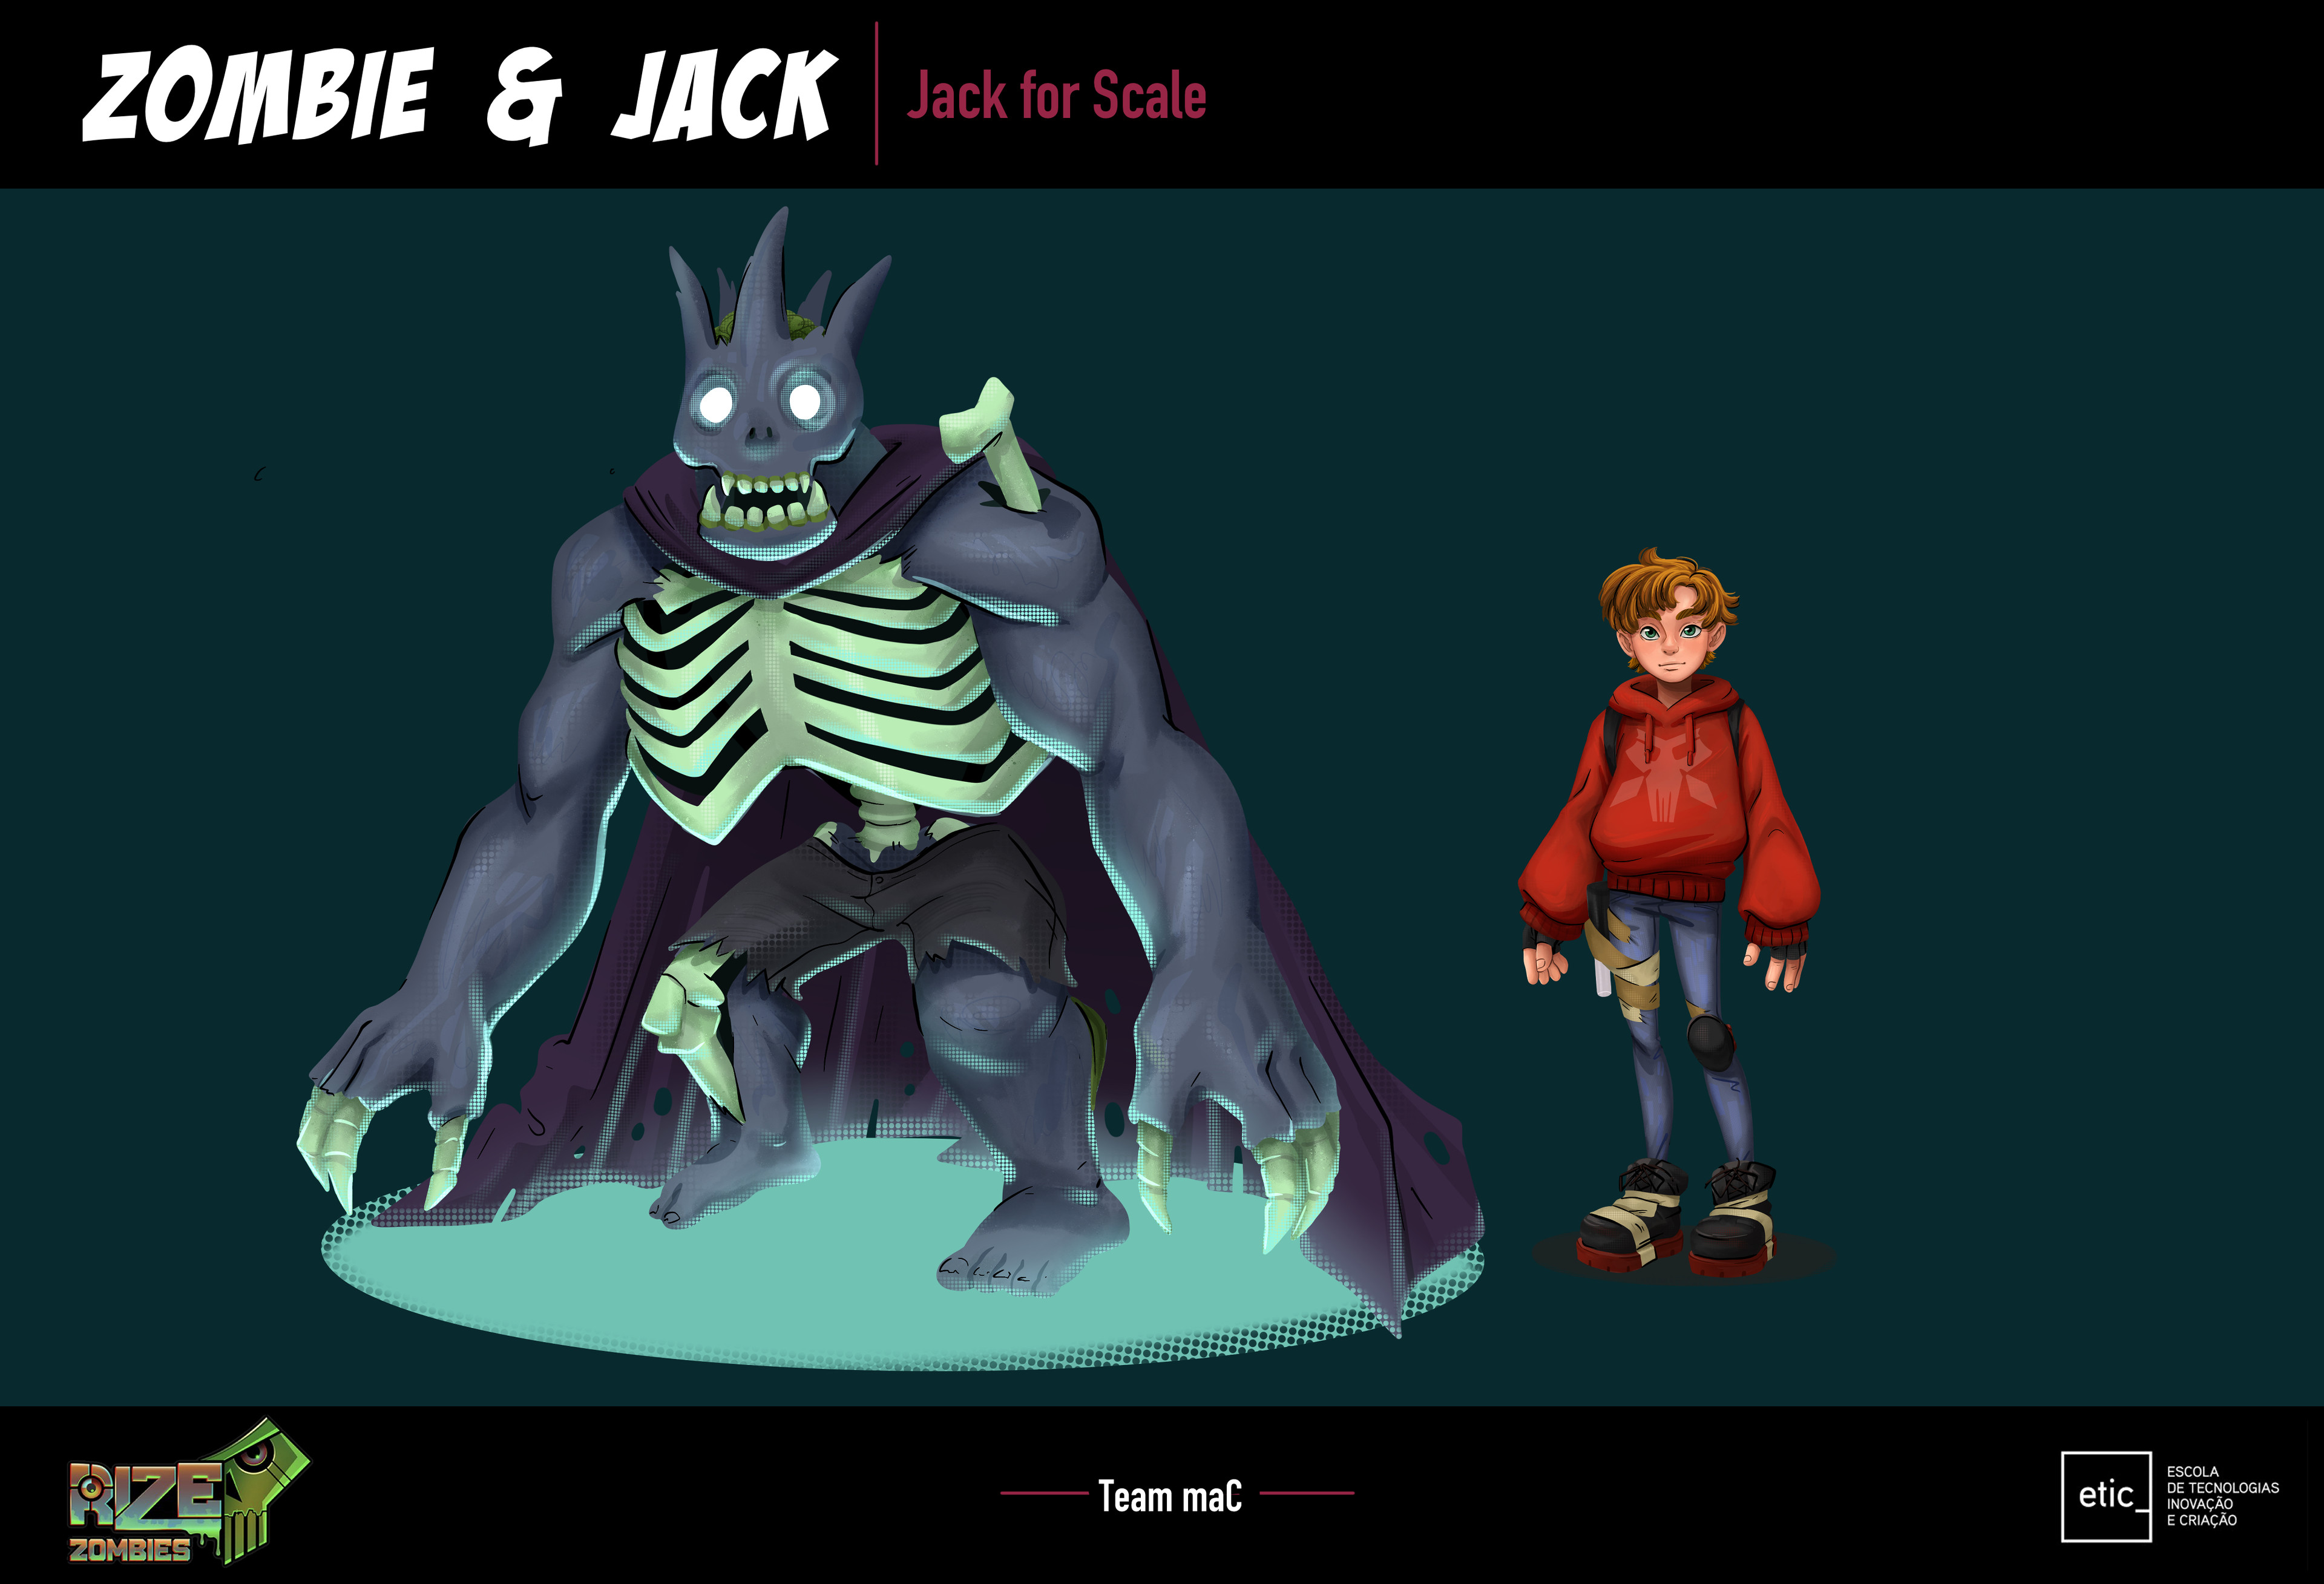 We decided to go with a Zombie King, but we wanted to keep a very contrasting silhouette compared to Jack. This Zombie would call on his lackeys to fight for him.